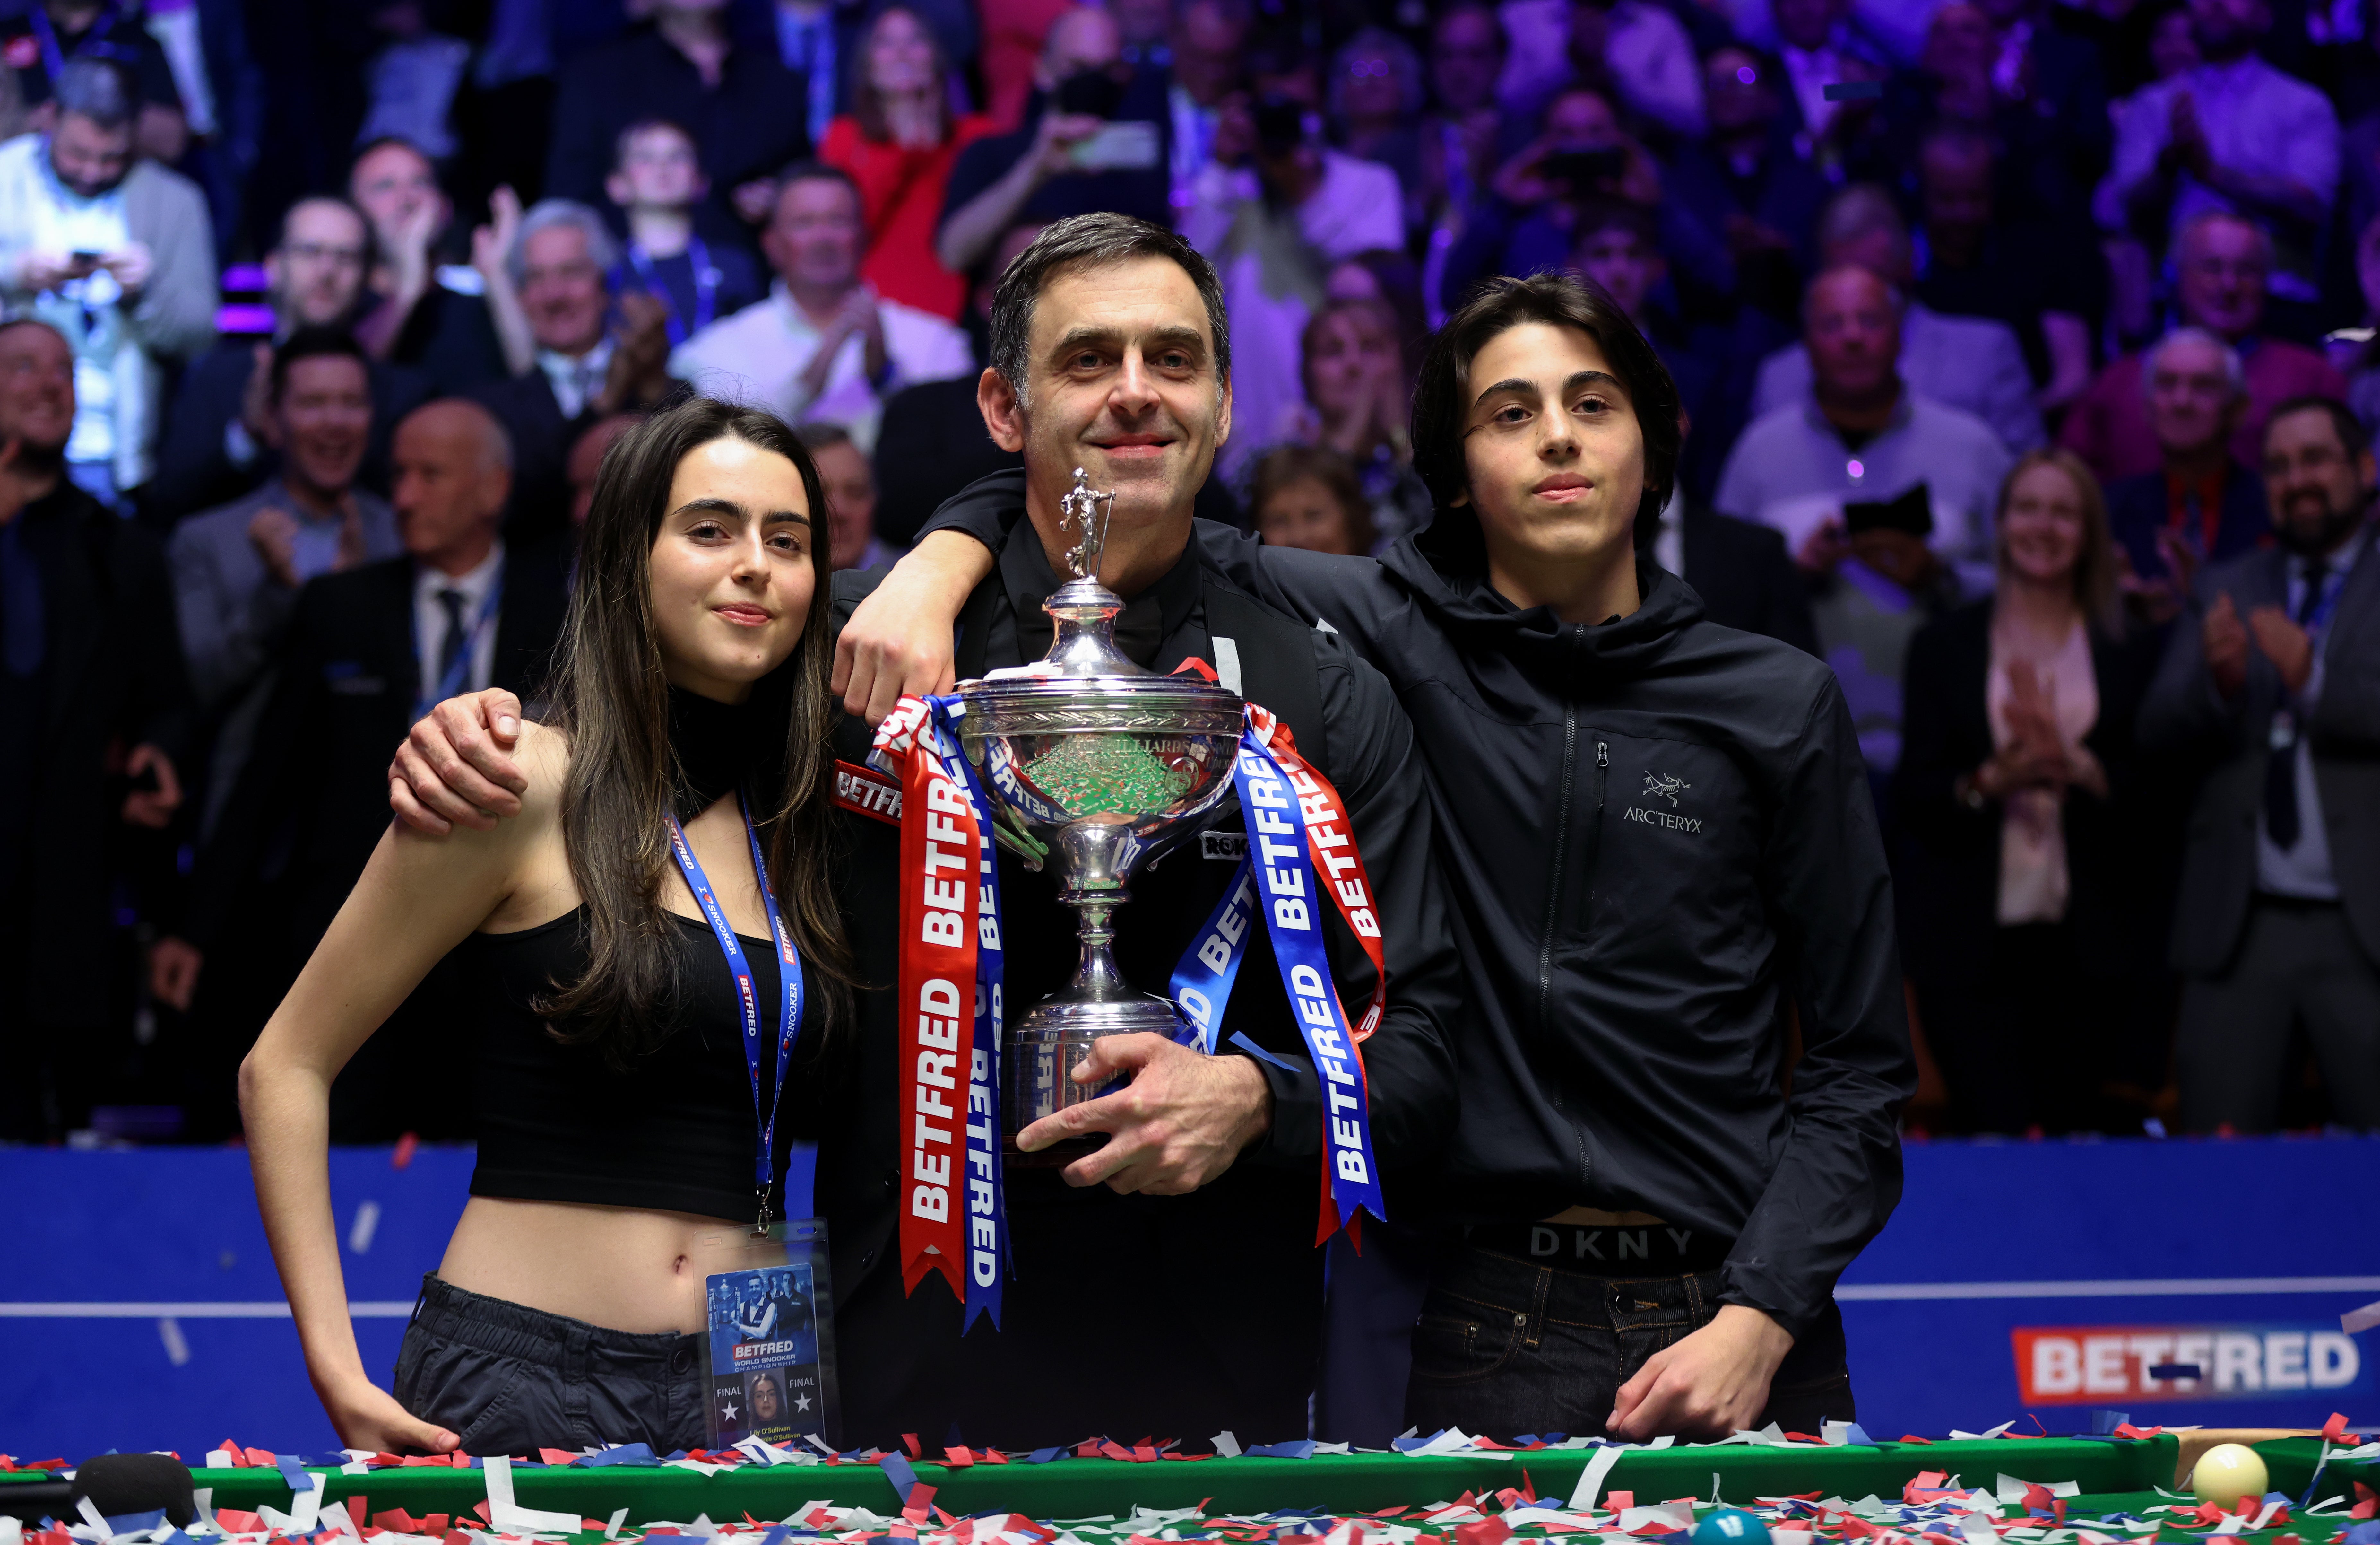 O’Sullivan poses with his children, Lily and Ronnie Jr, after winning the 2022 title